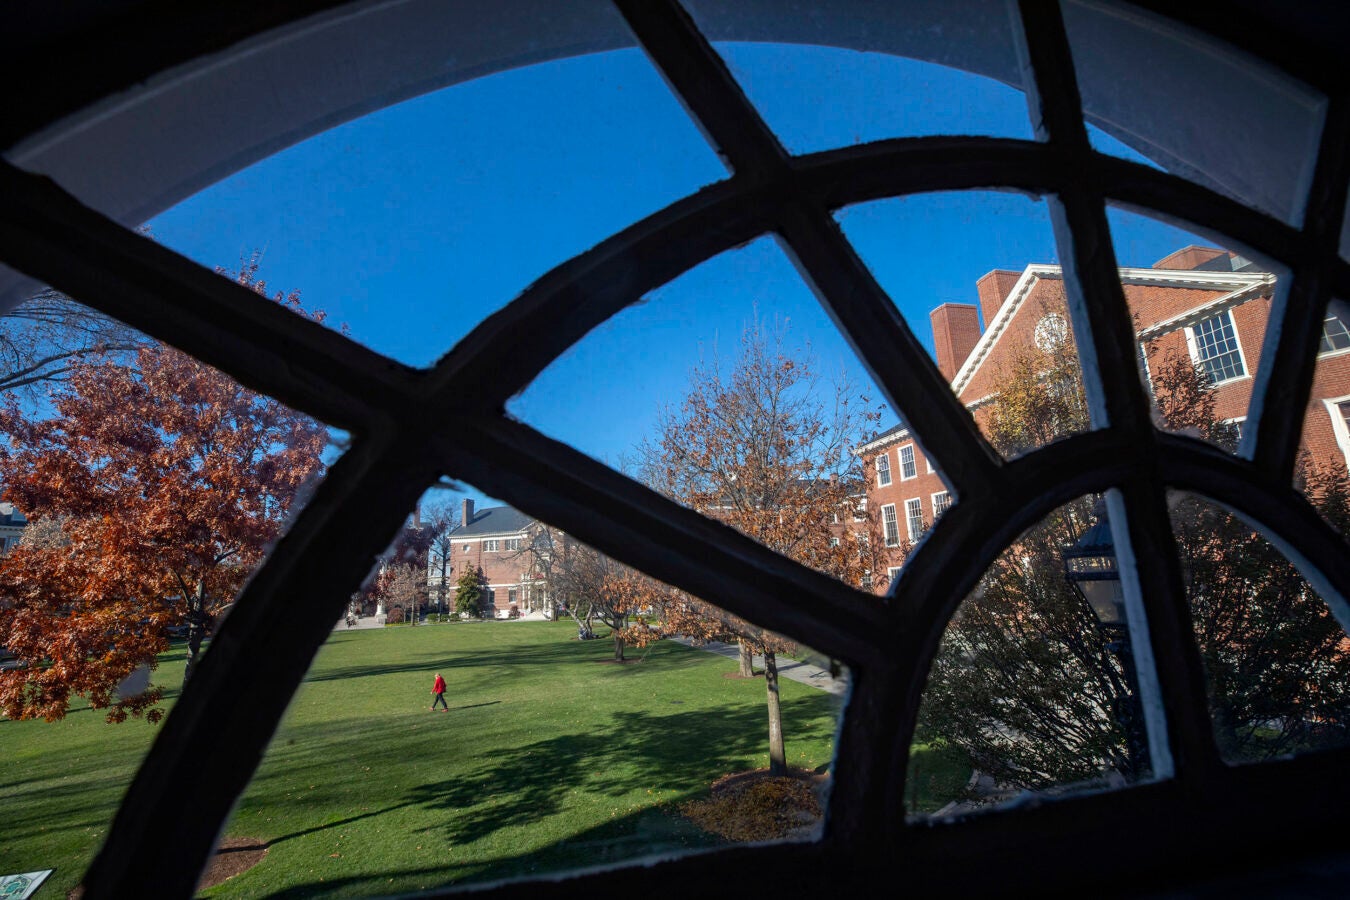 Framed by a Longfellow Hall window, autumn light strikes Byerly hall as a pedestrian passes through Radcliffe Yard.